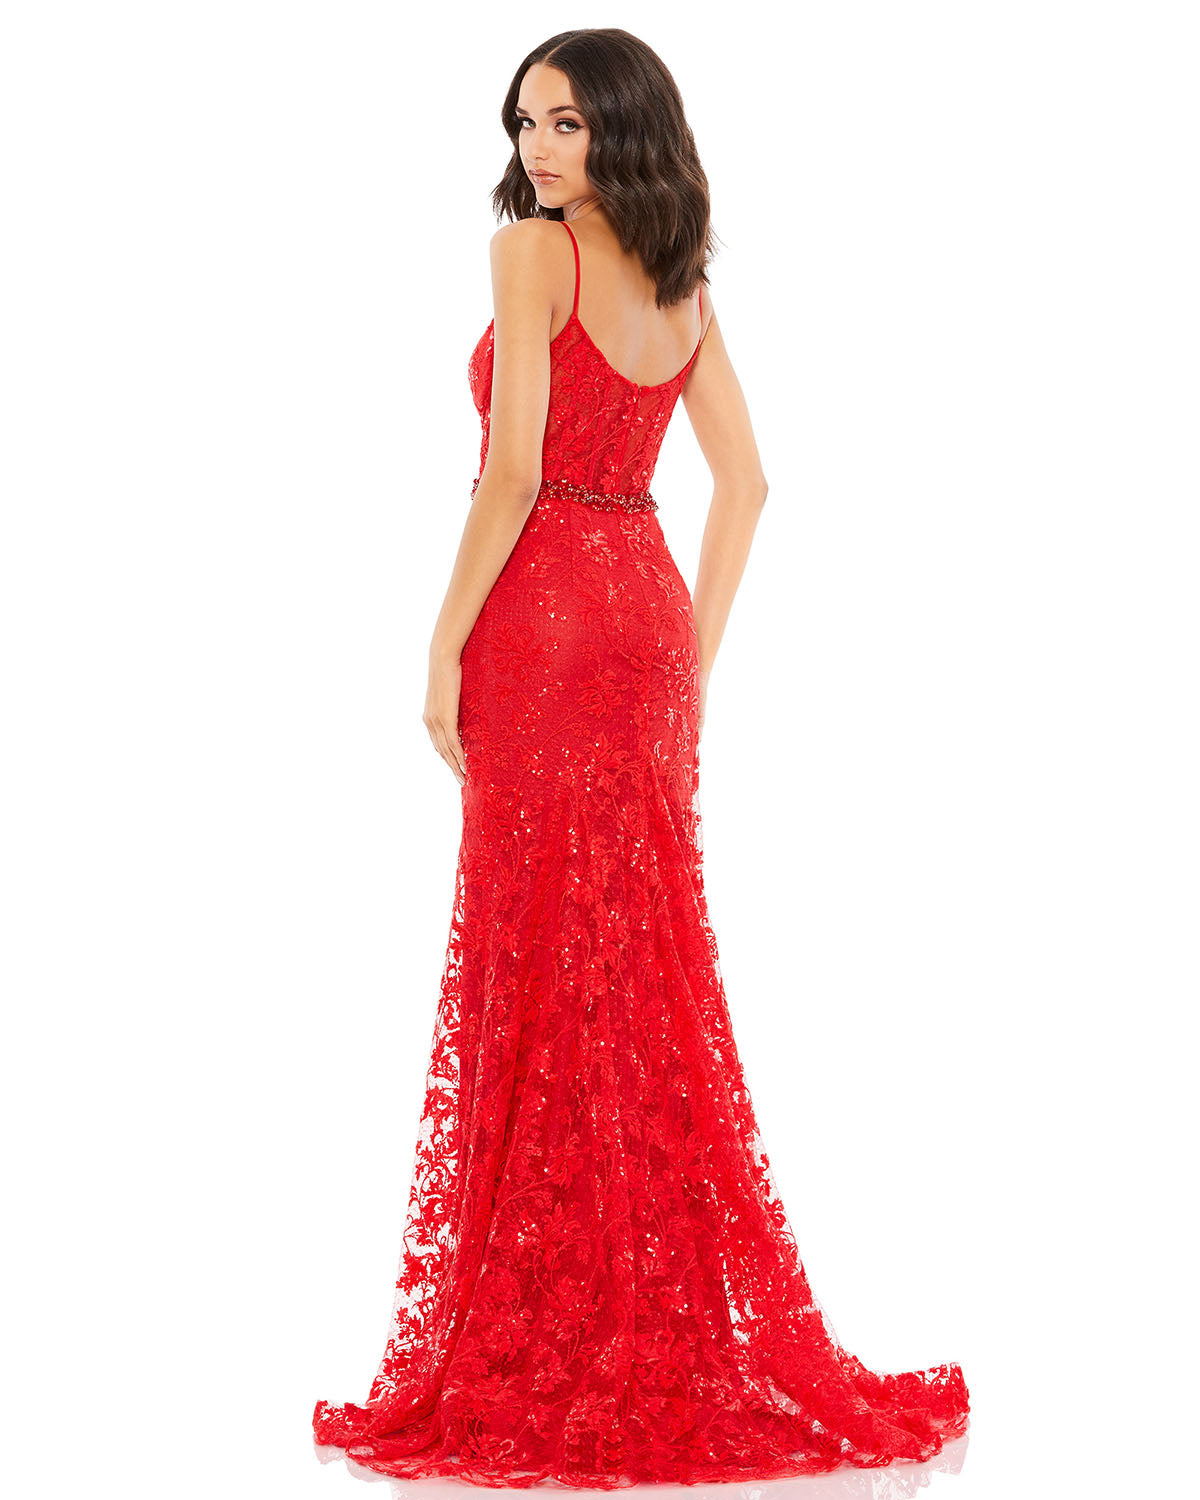 Embroidered Illusion Bodice Sleeveless Trumpet Gown